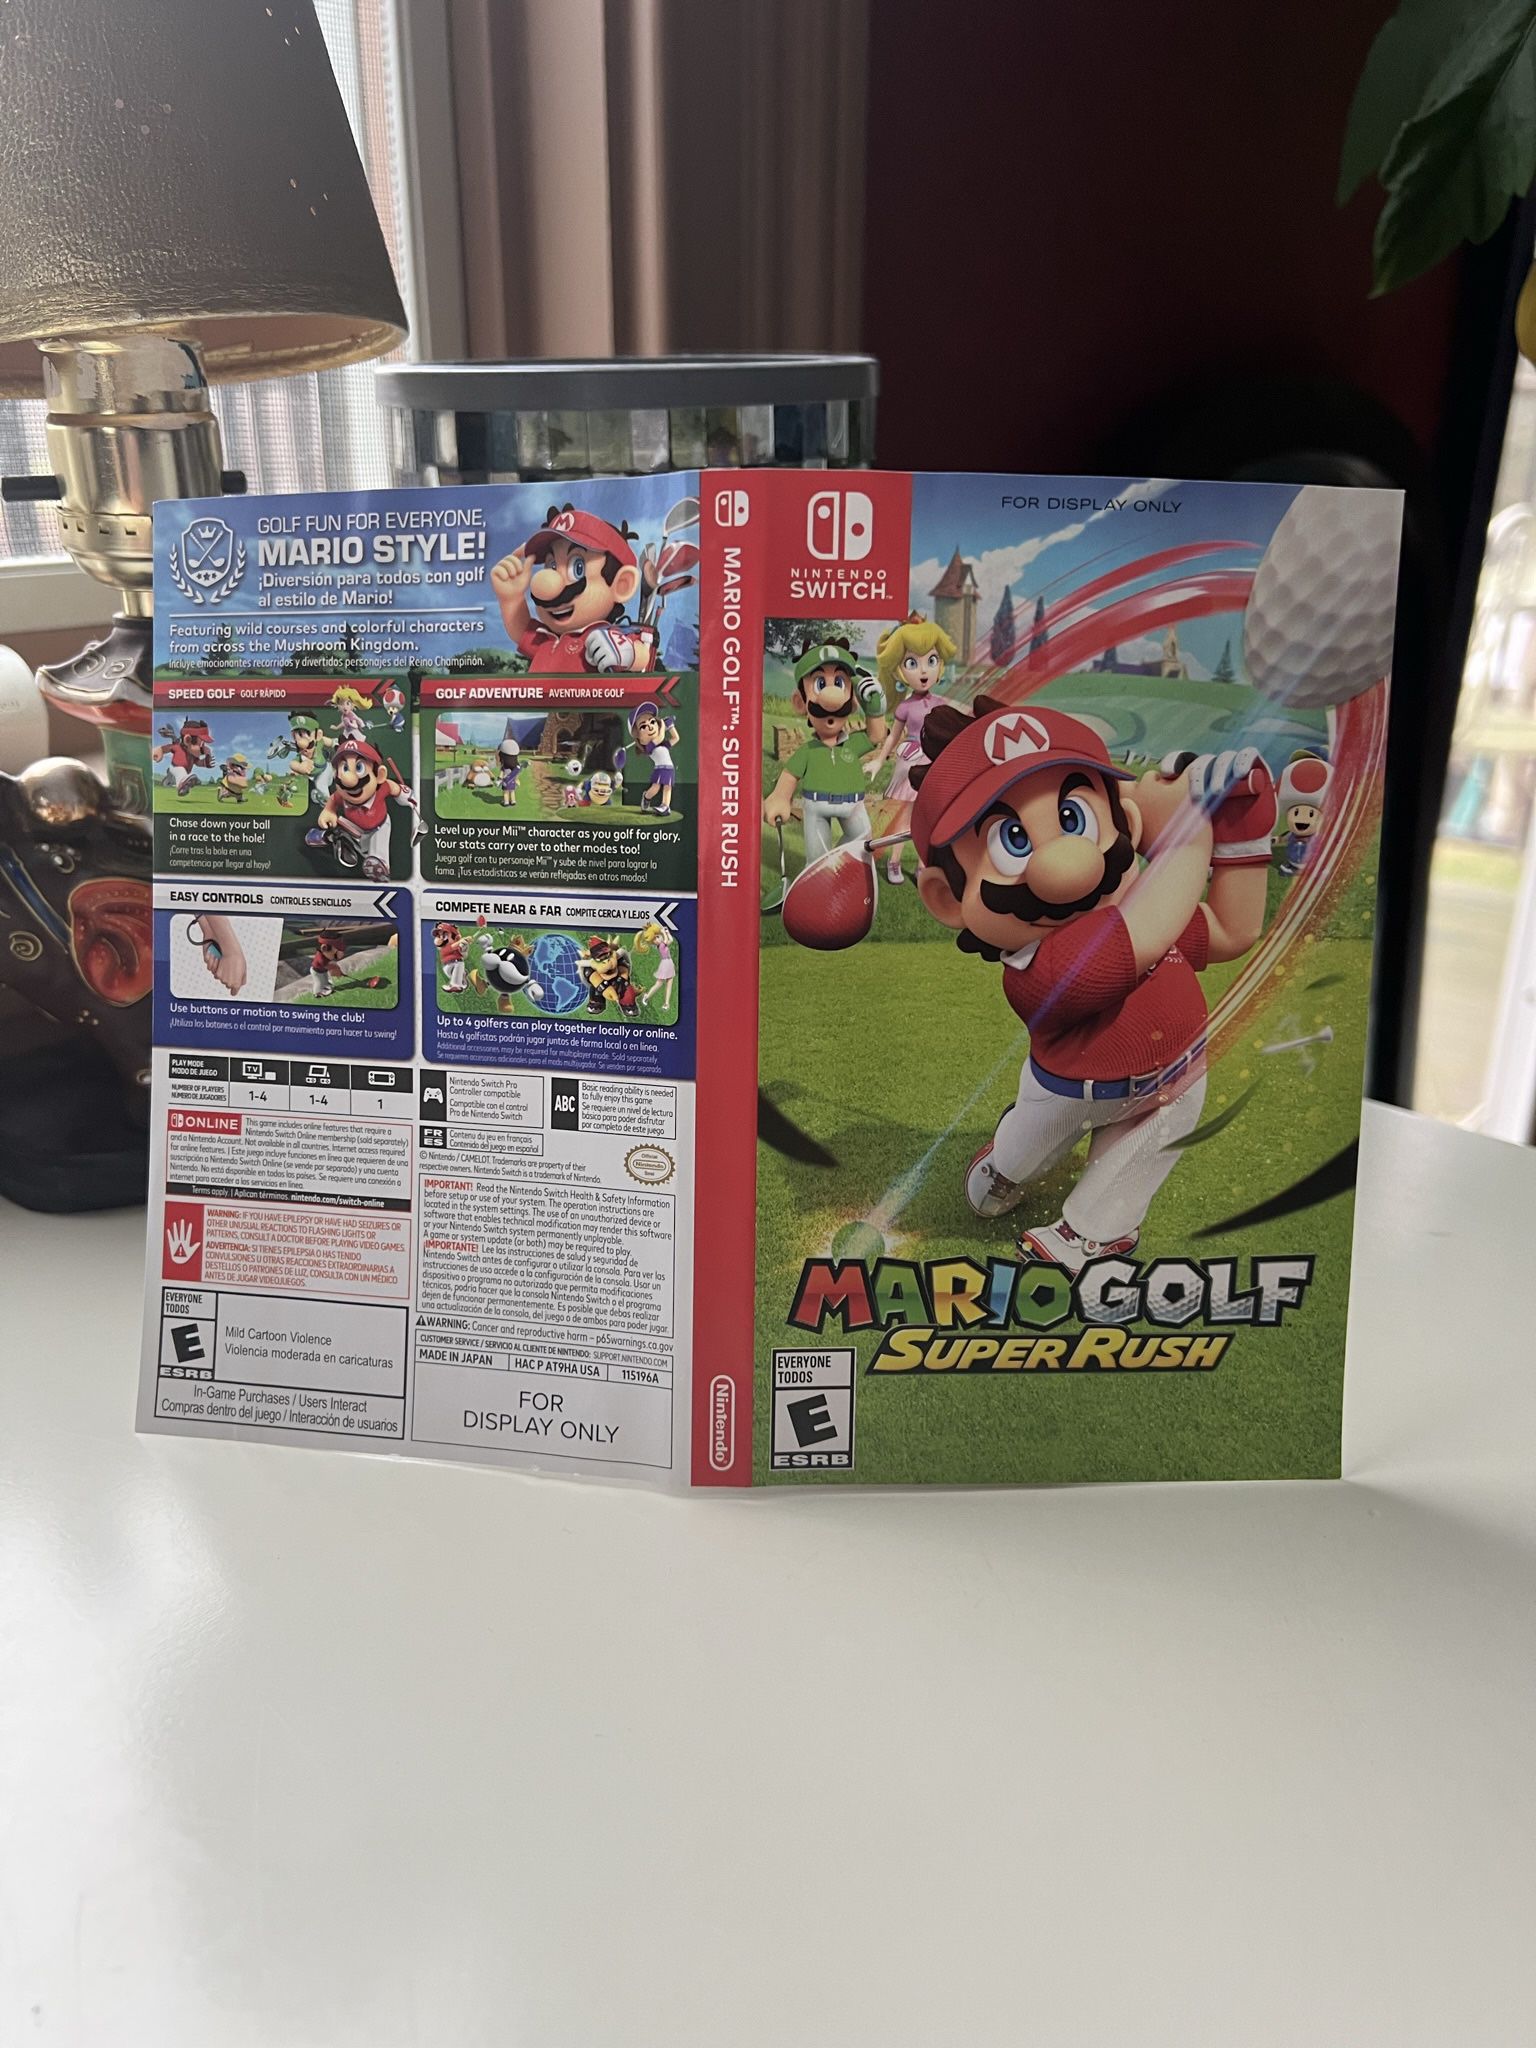 Mario Golf Super Rush Nintendo Switch ‘For Display Only’ Case Artwork Only